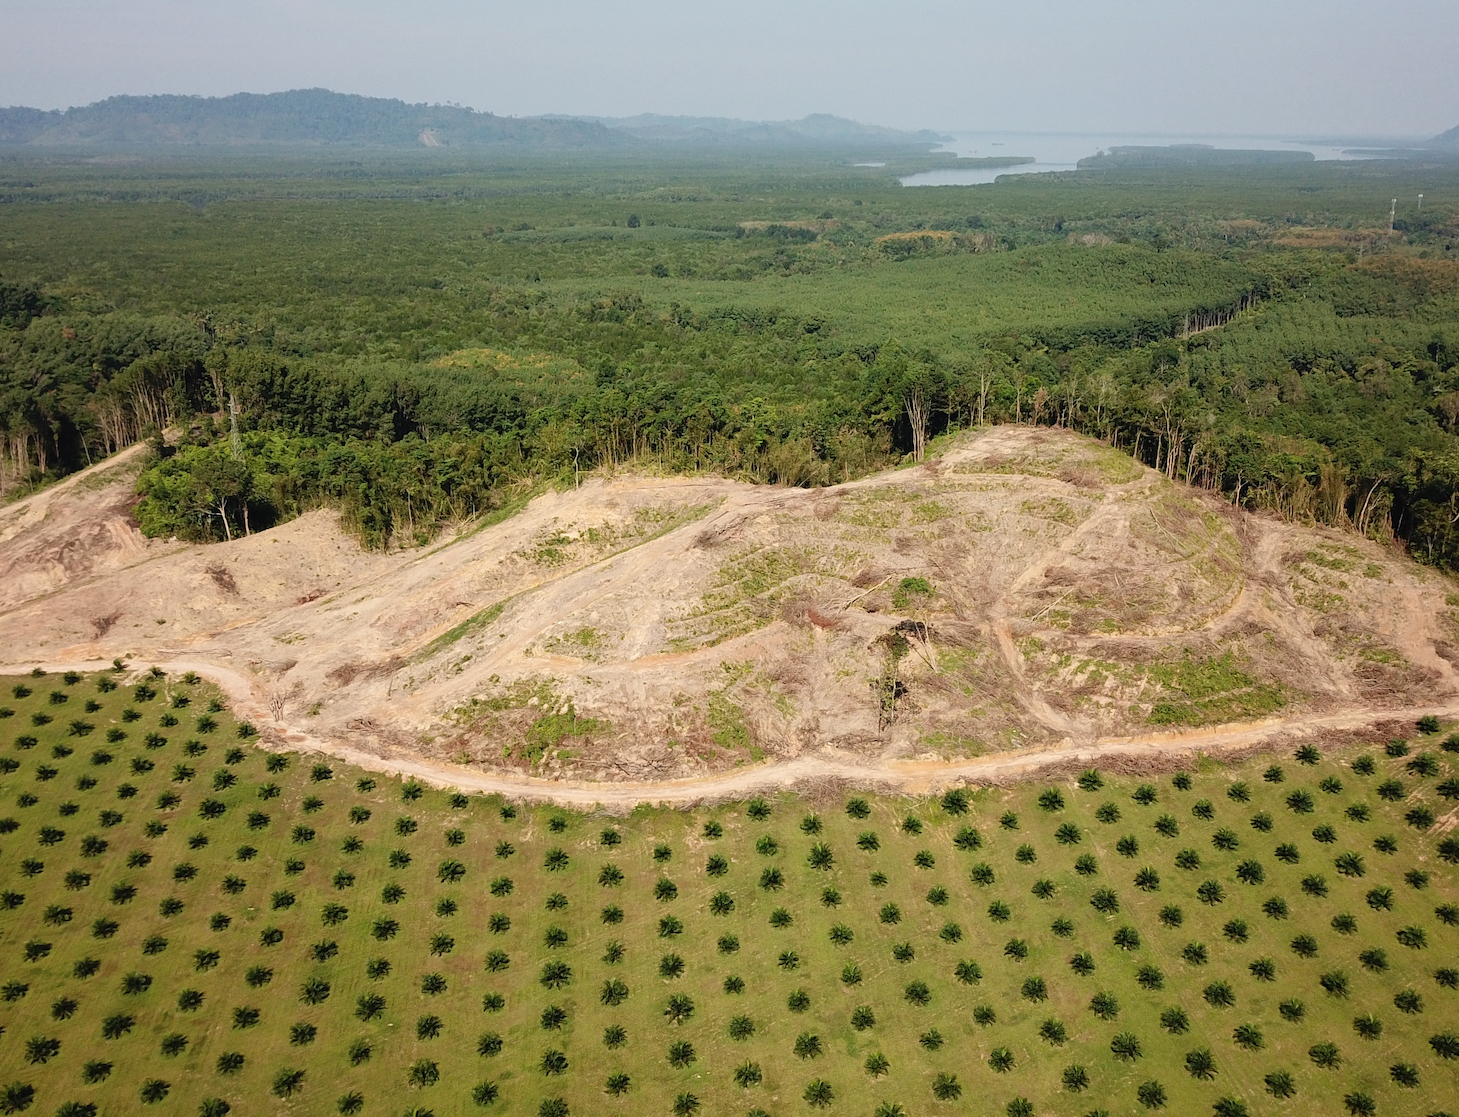 Palm oil plantation showing deforestation in Southeast Asia.